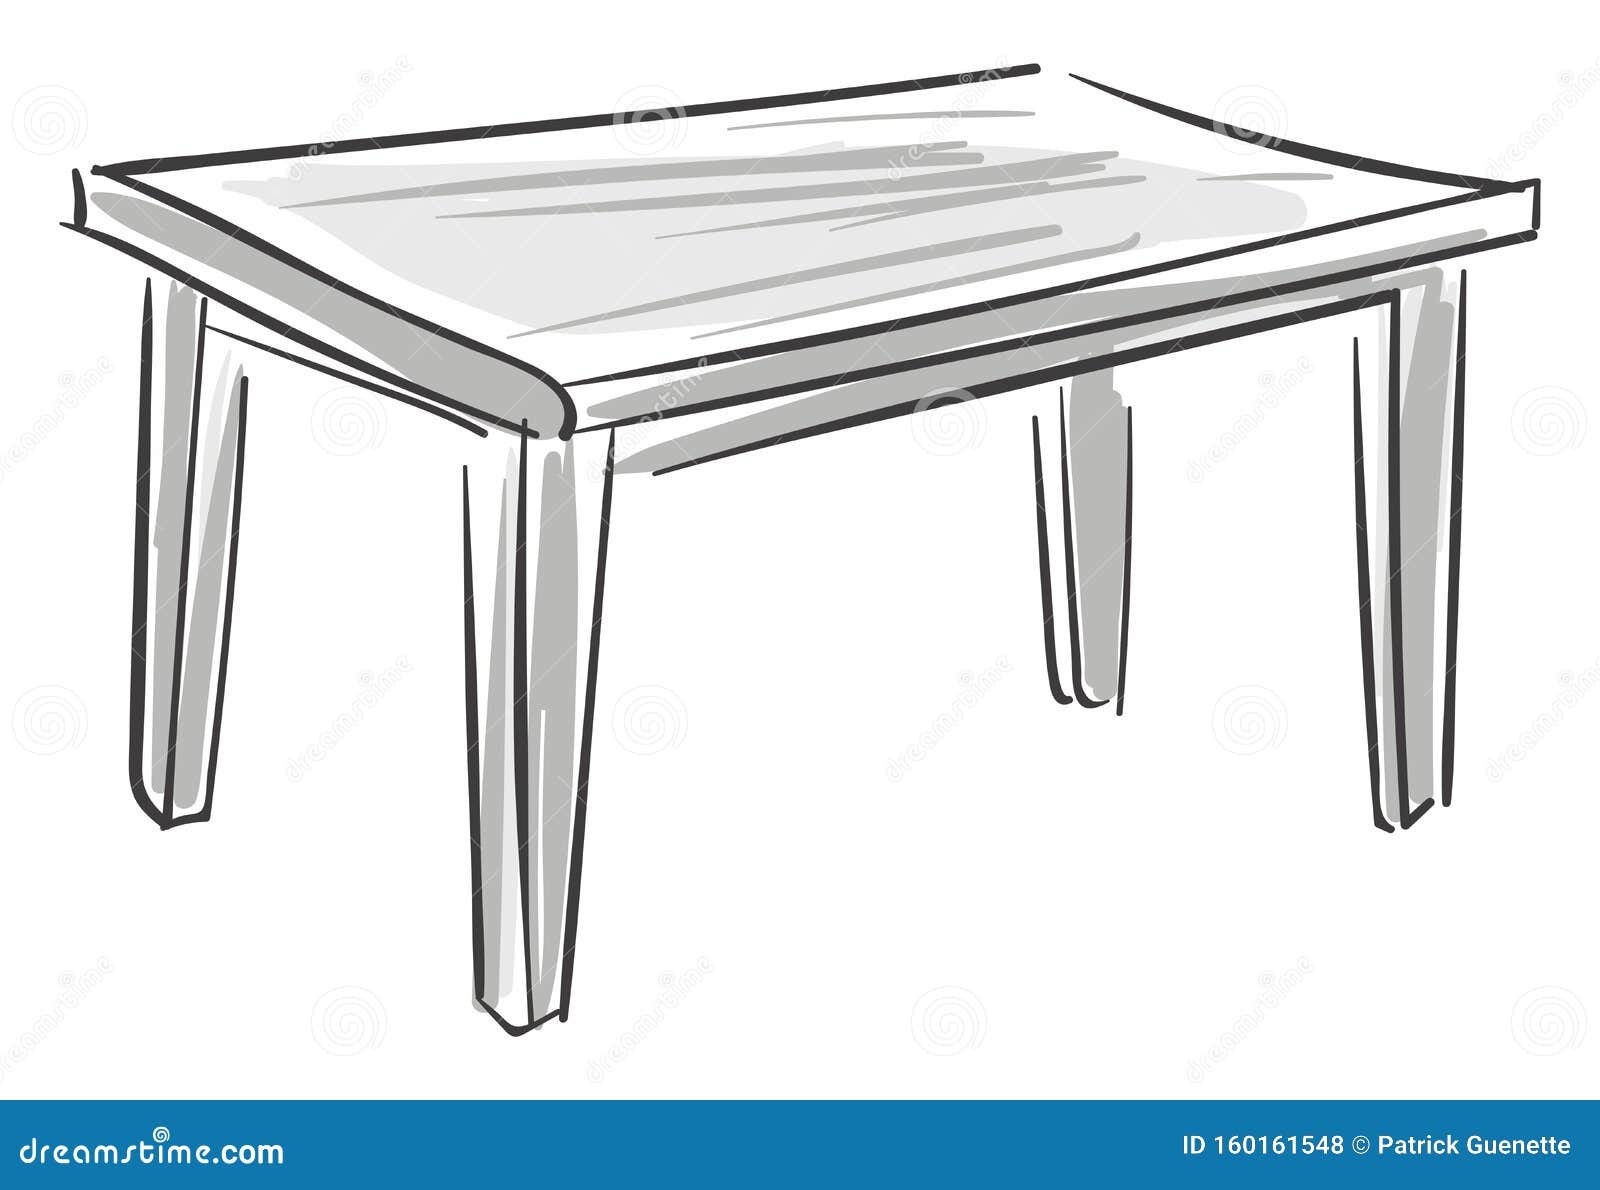 Premium Vector  Realistic sketch of different tables in perspective table  set illustration  Brown wood table White dinning table Table